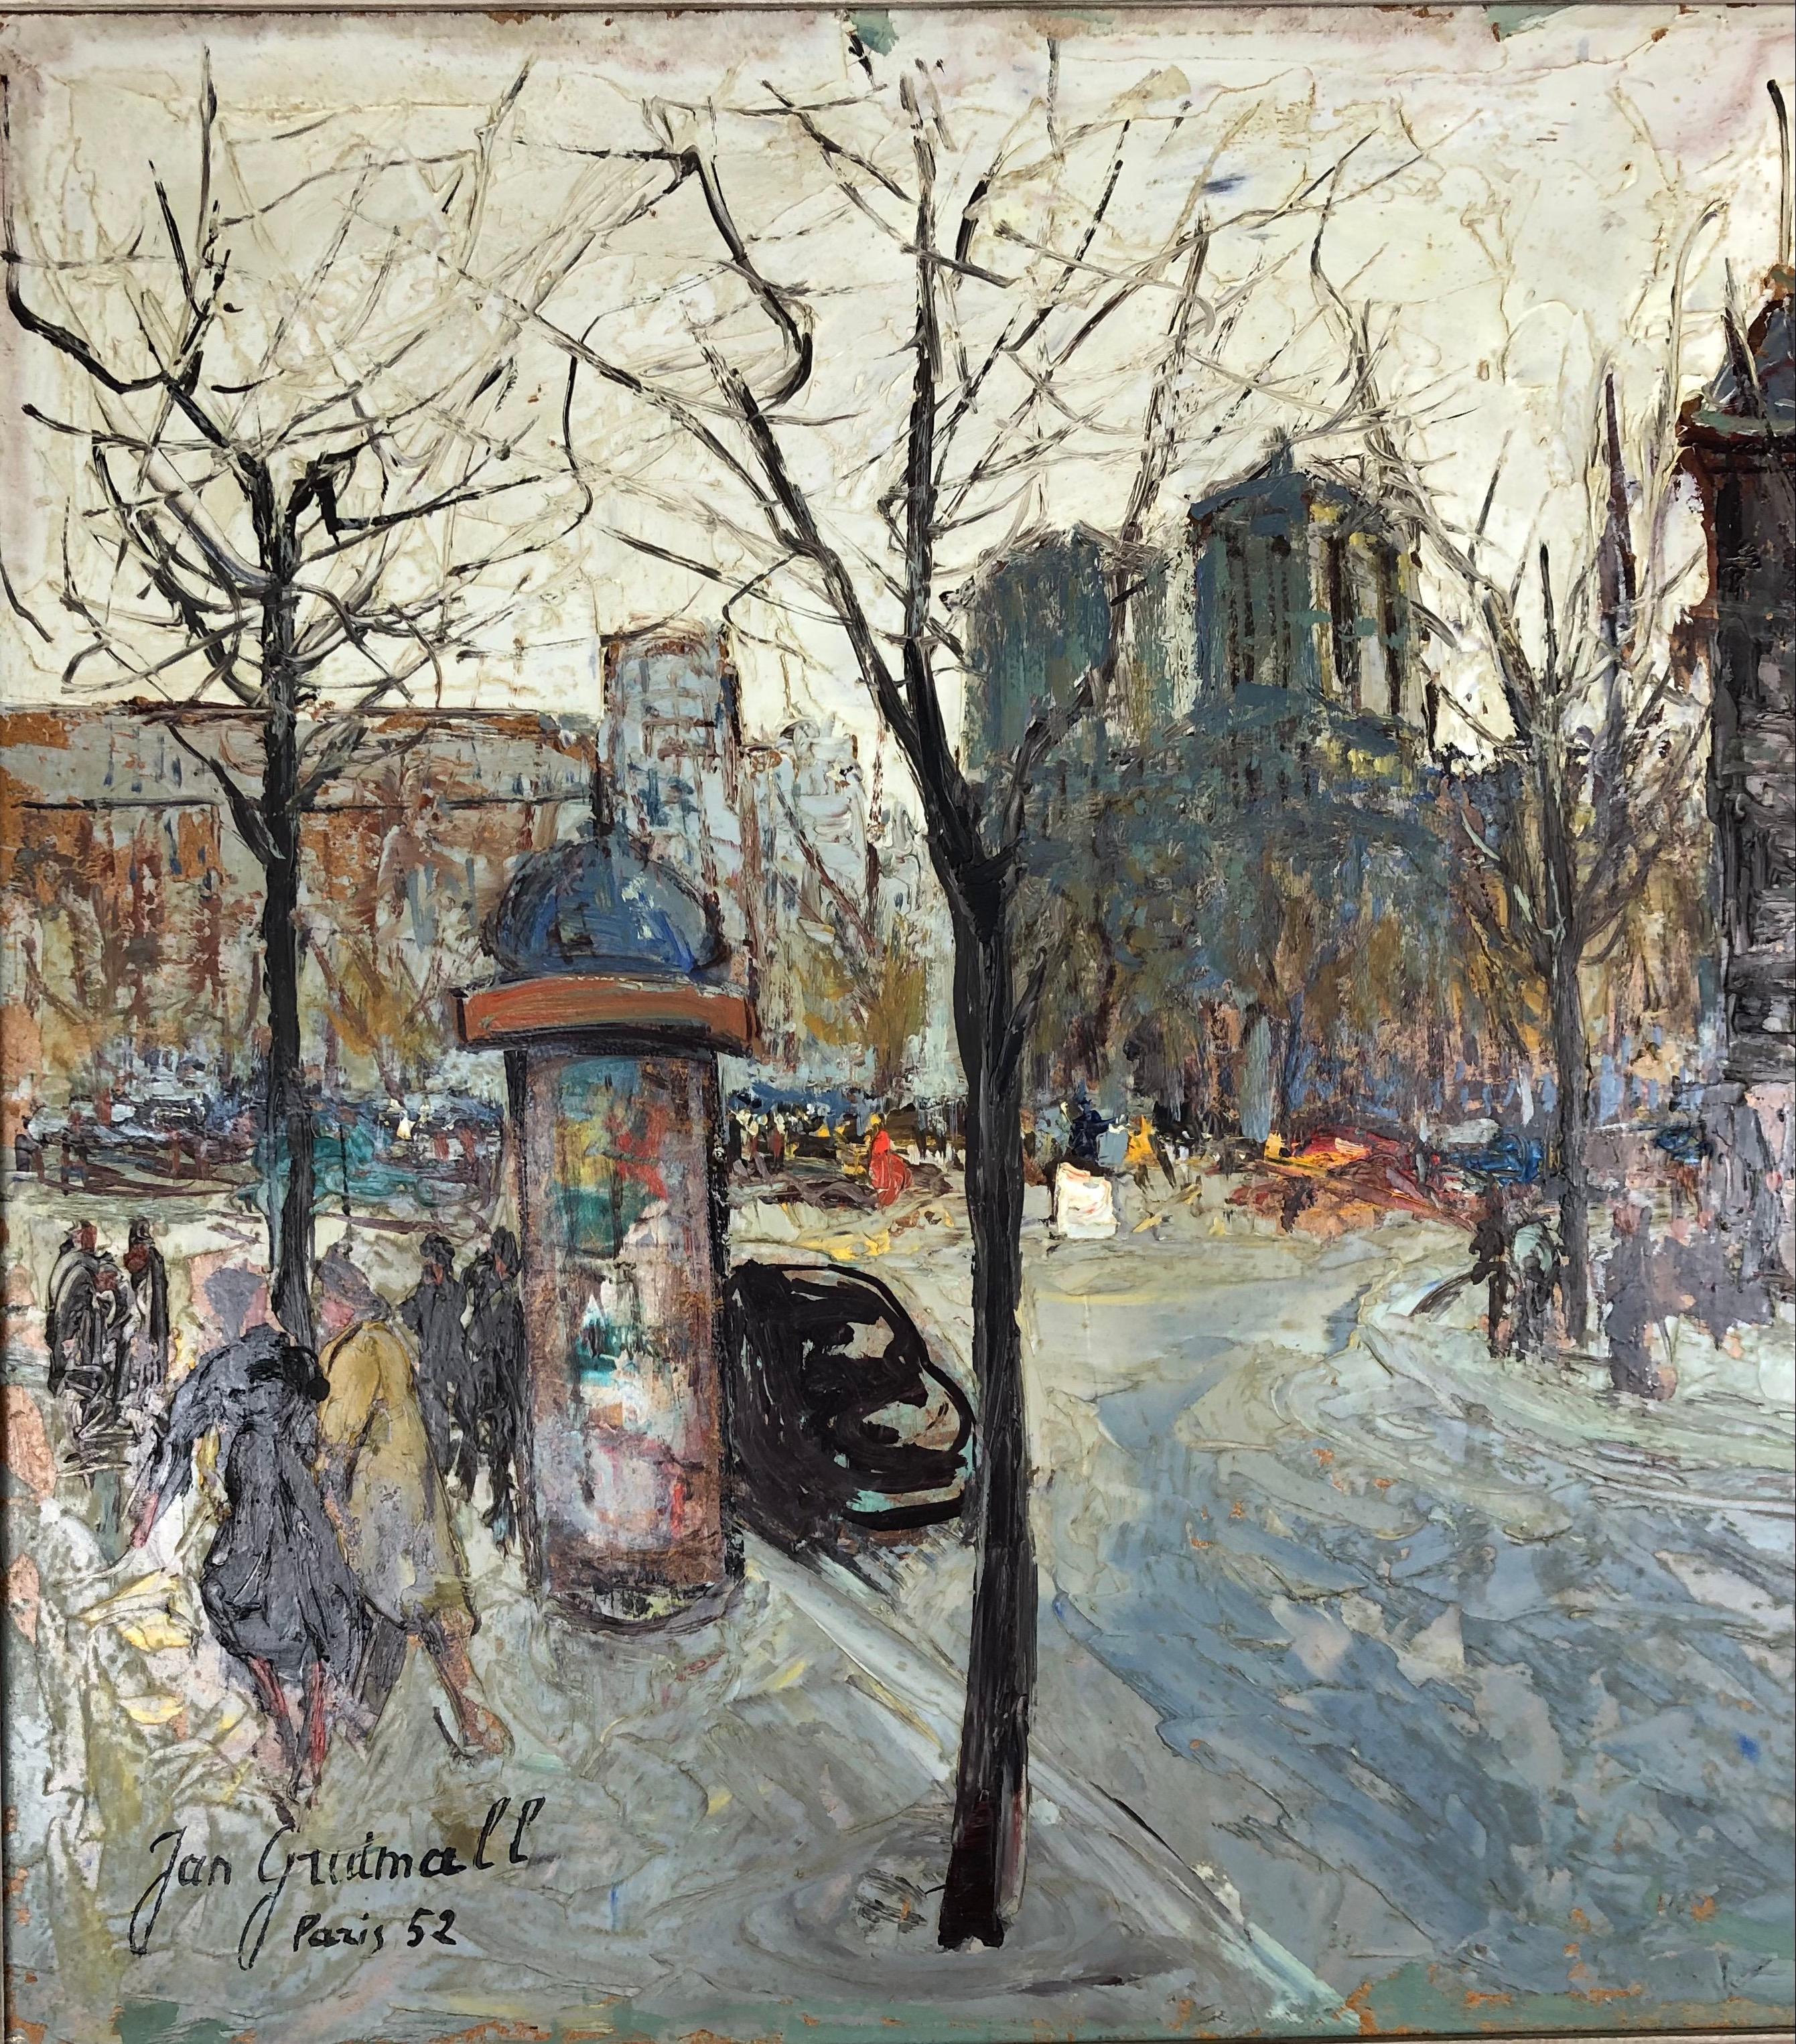 French Paris France Cityscape Oil Painting by Jan Gridmall, Signed and Dated 1952 For Sale